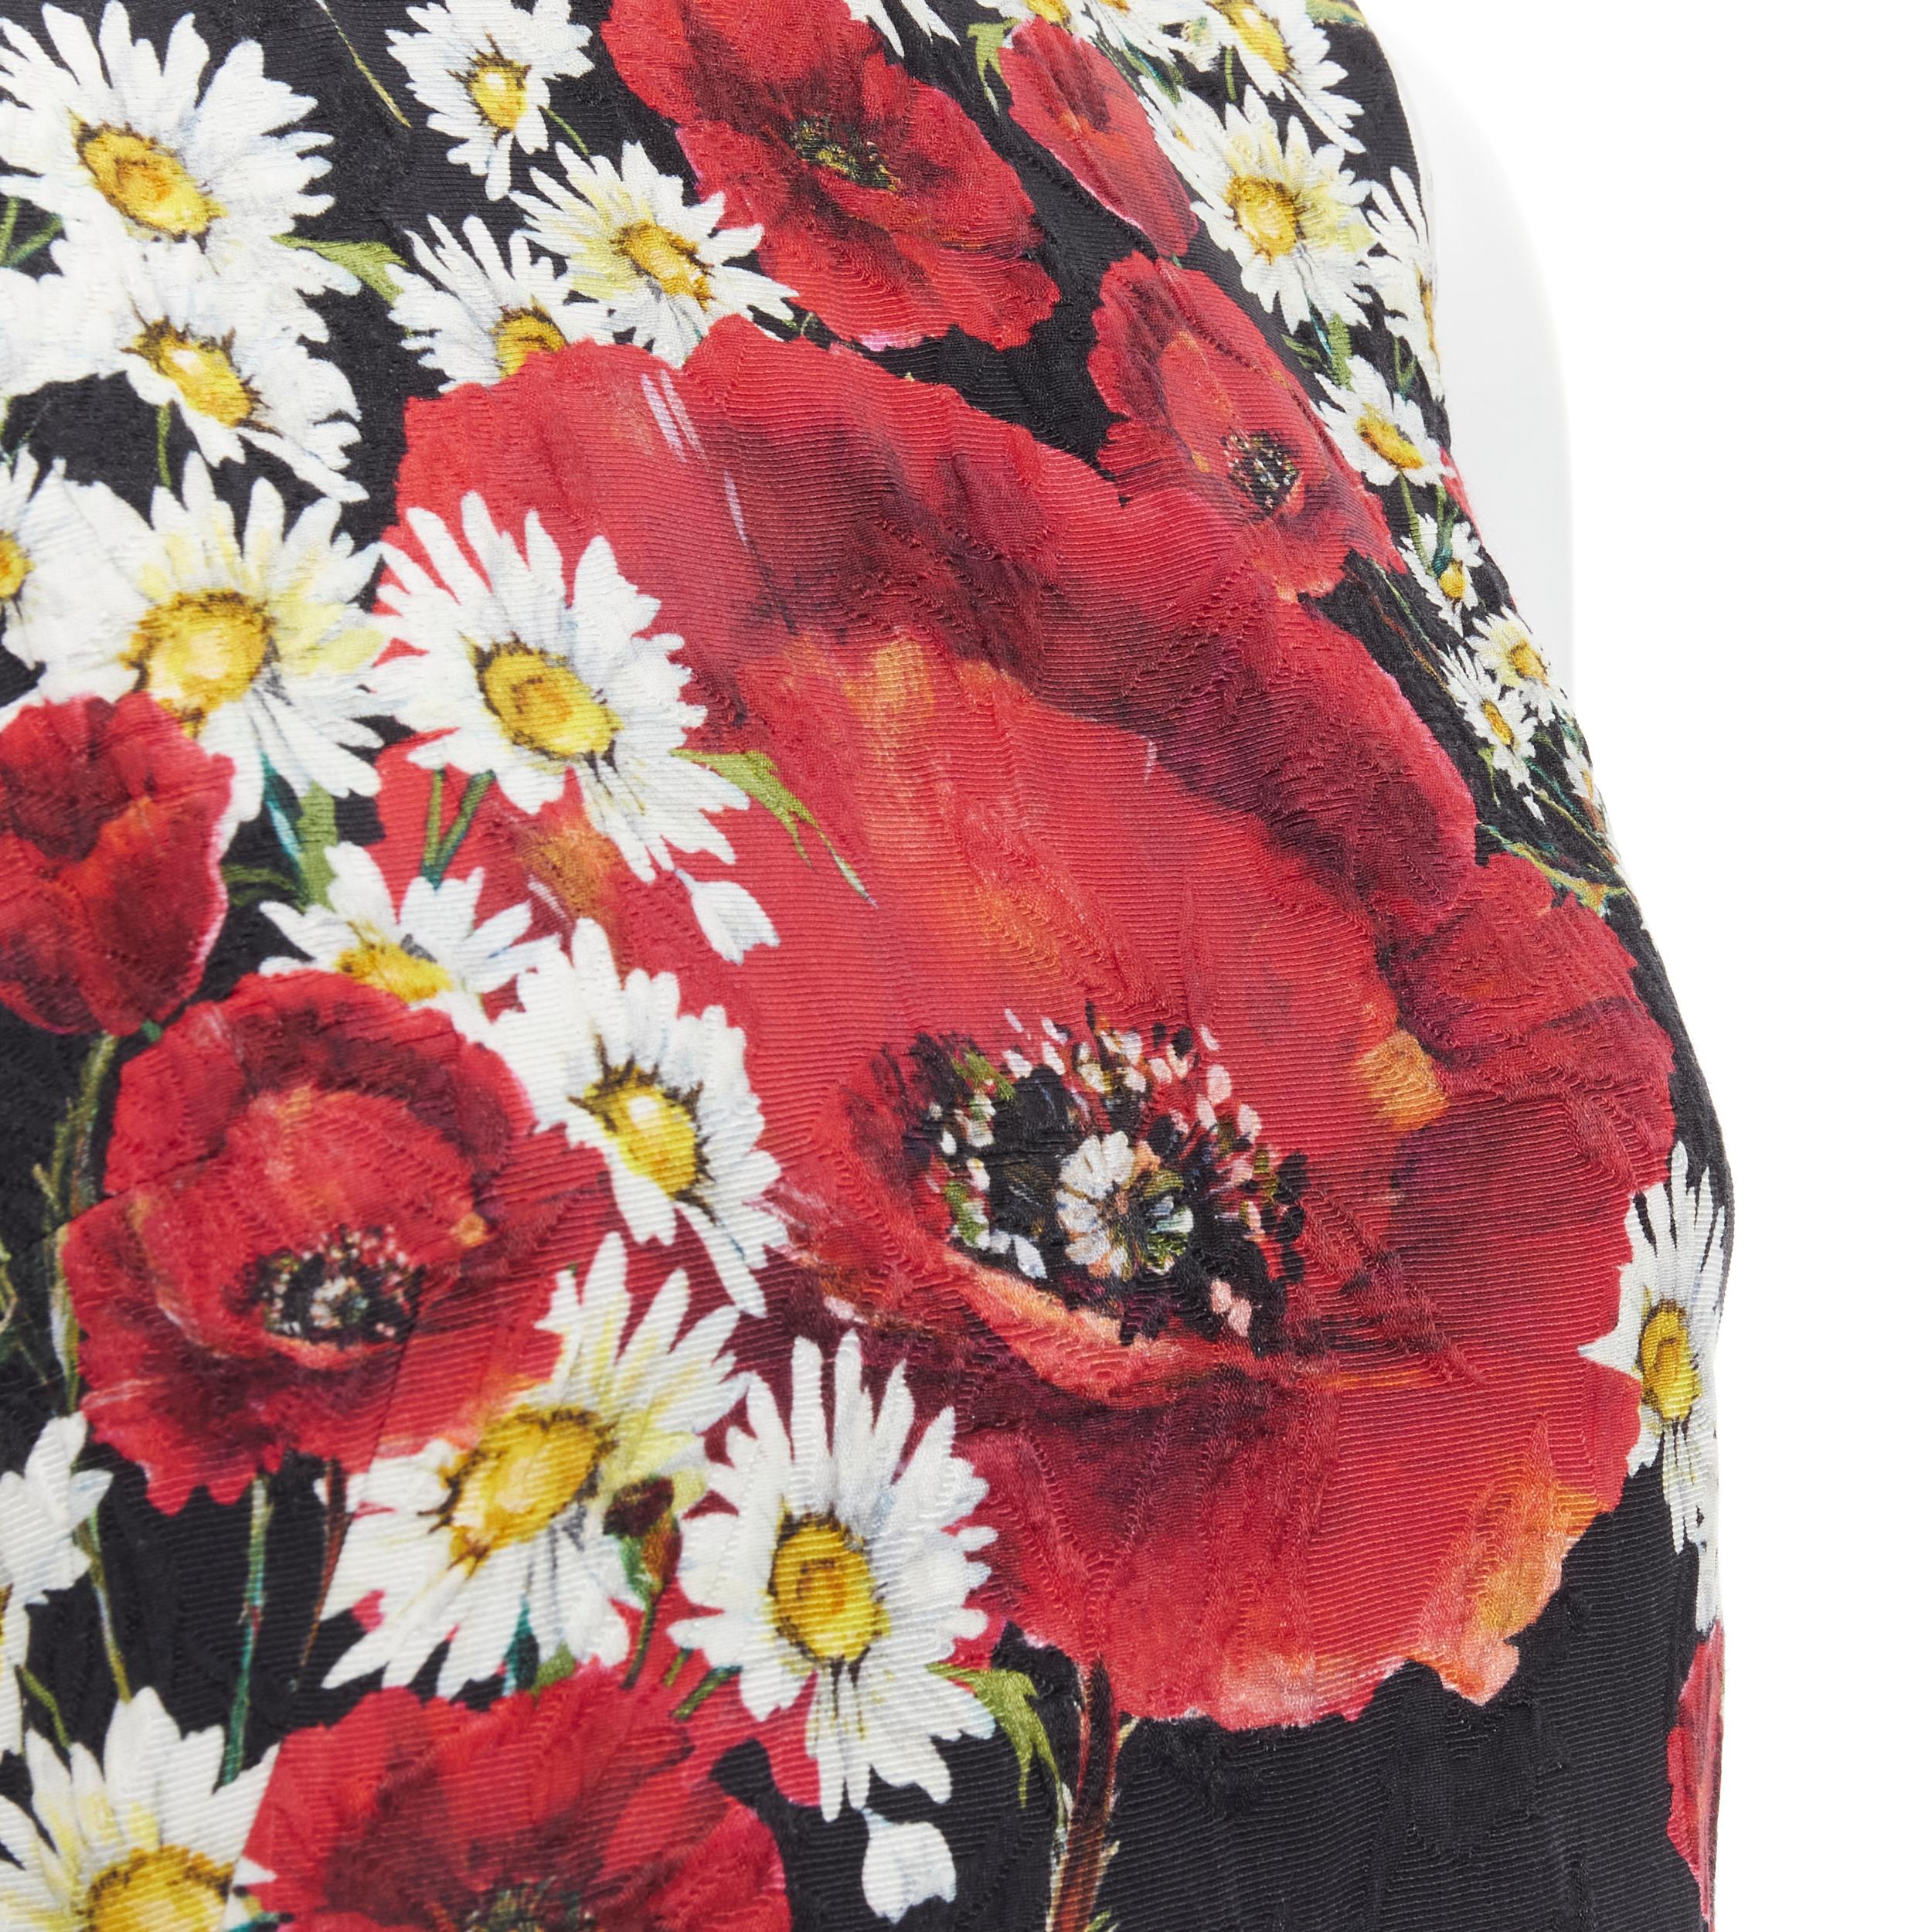 DOLCE GABBANA Poppy Daisy floral print jacquard mini sheath dress IT36 XS In Excellent Condition For Sale In Hong Kong, NT